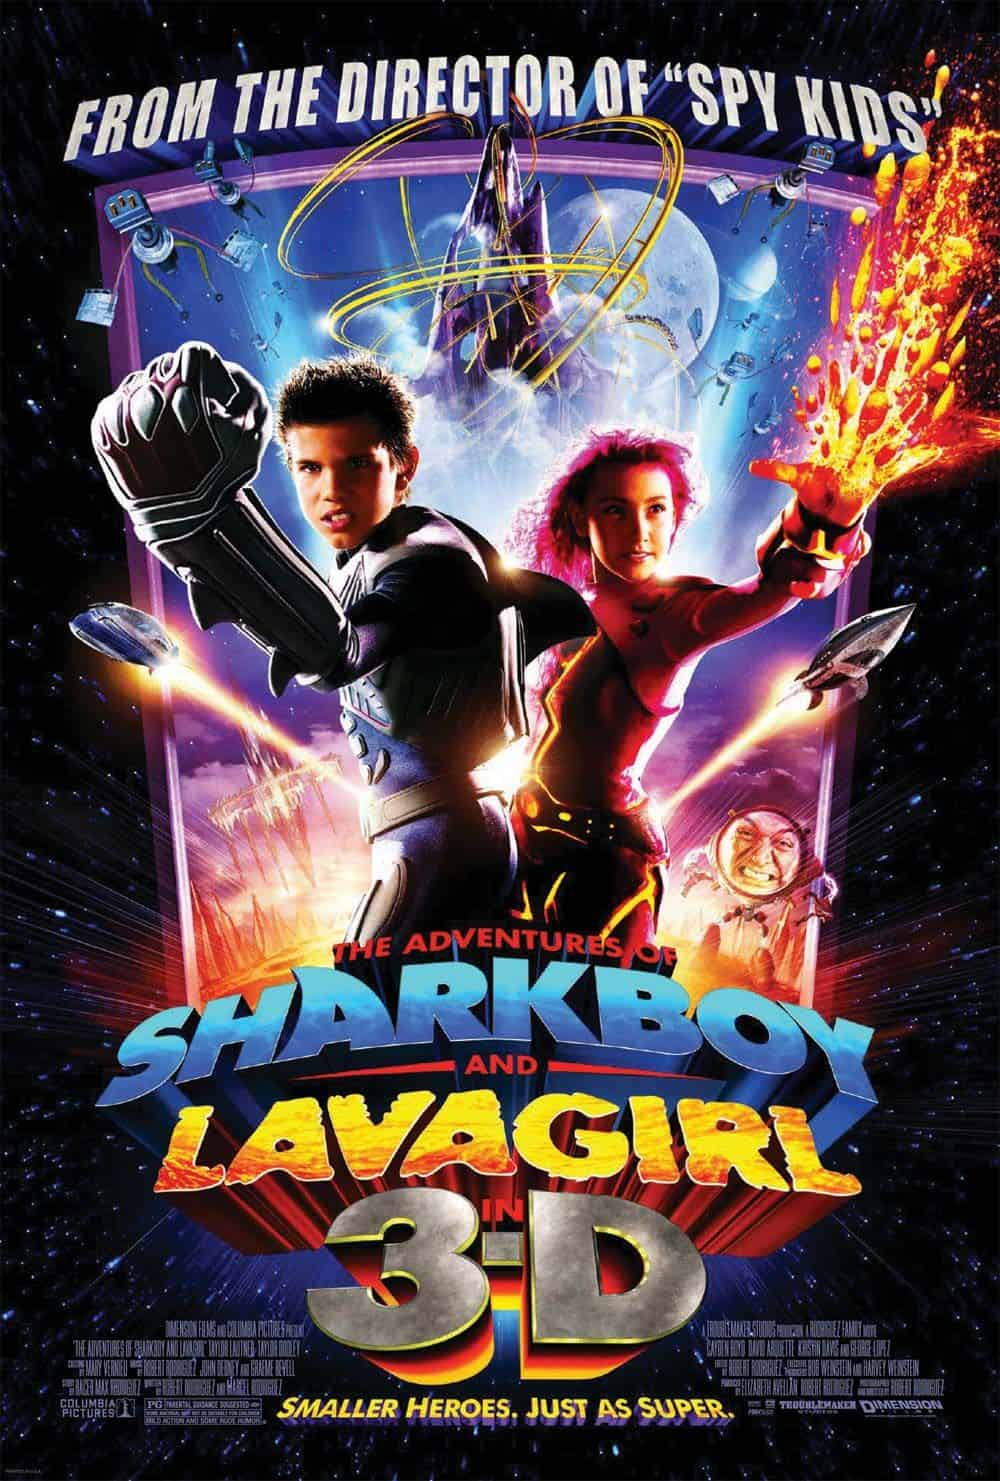 The Adventures of Sharkboy and Lava Girl (2005)